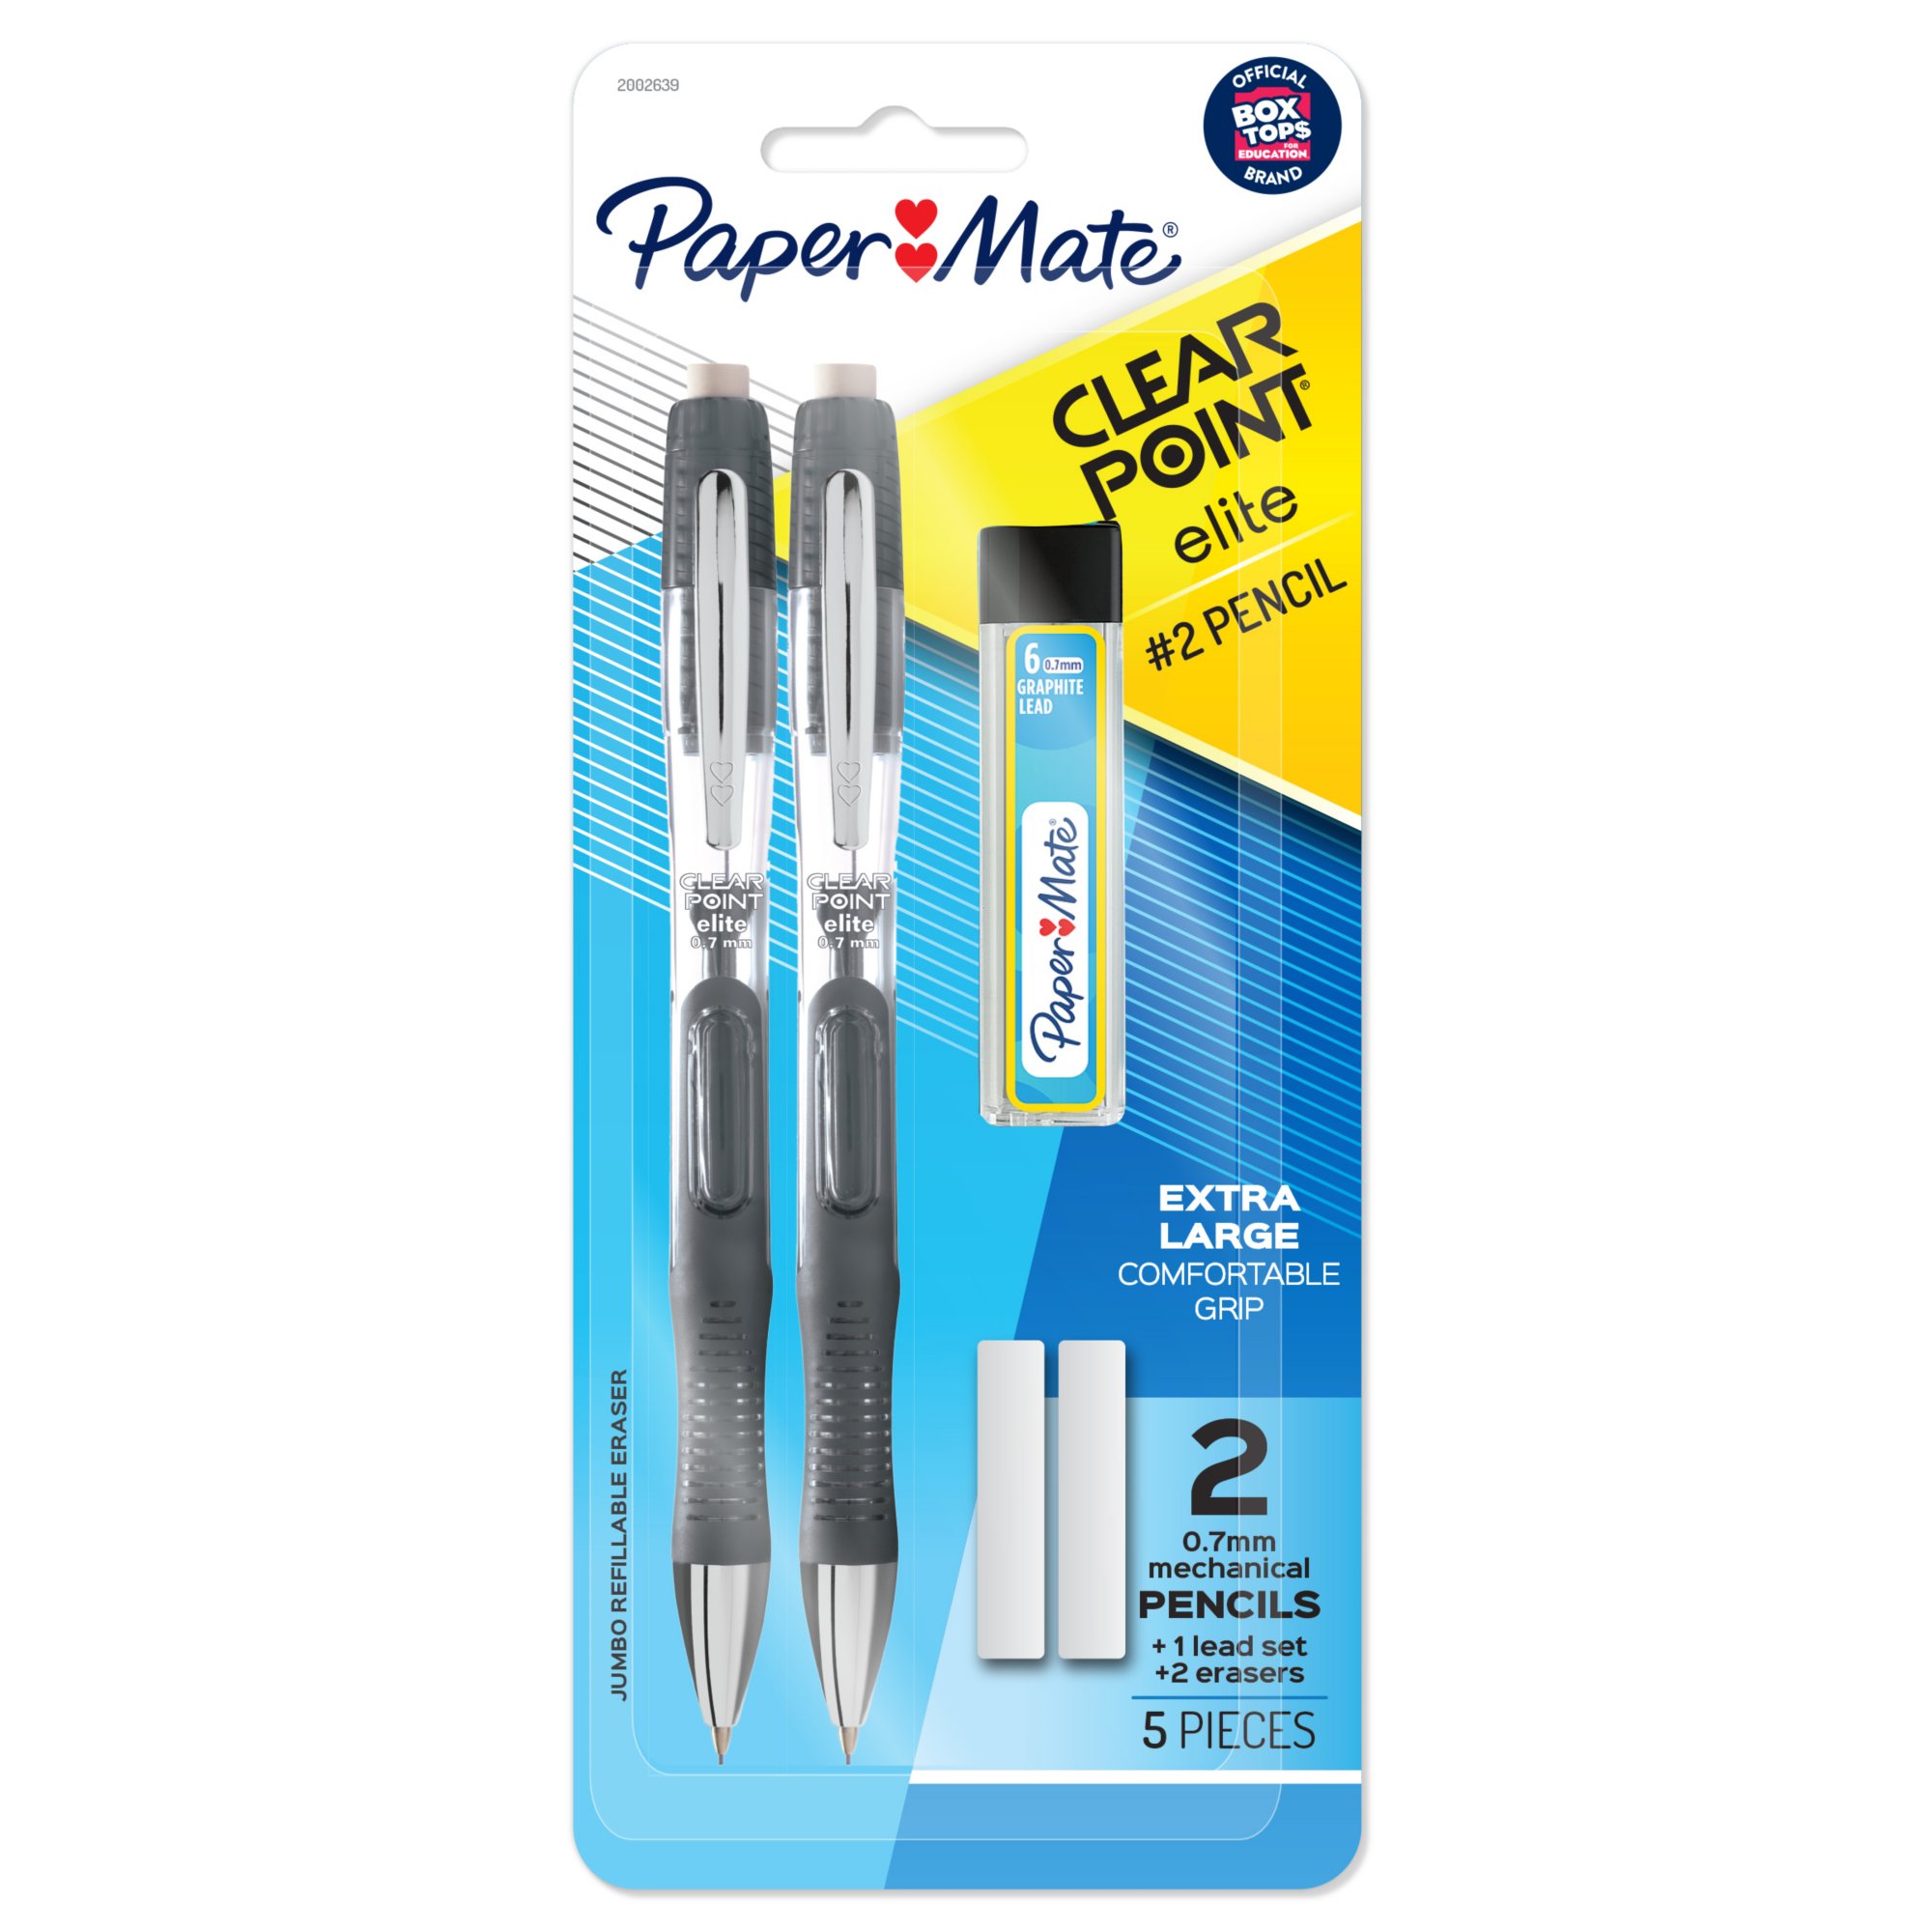 Paper Mate Clearpoint Color Lead and Eraser Mechanical Pencil